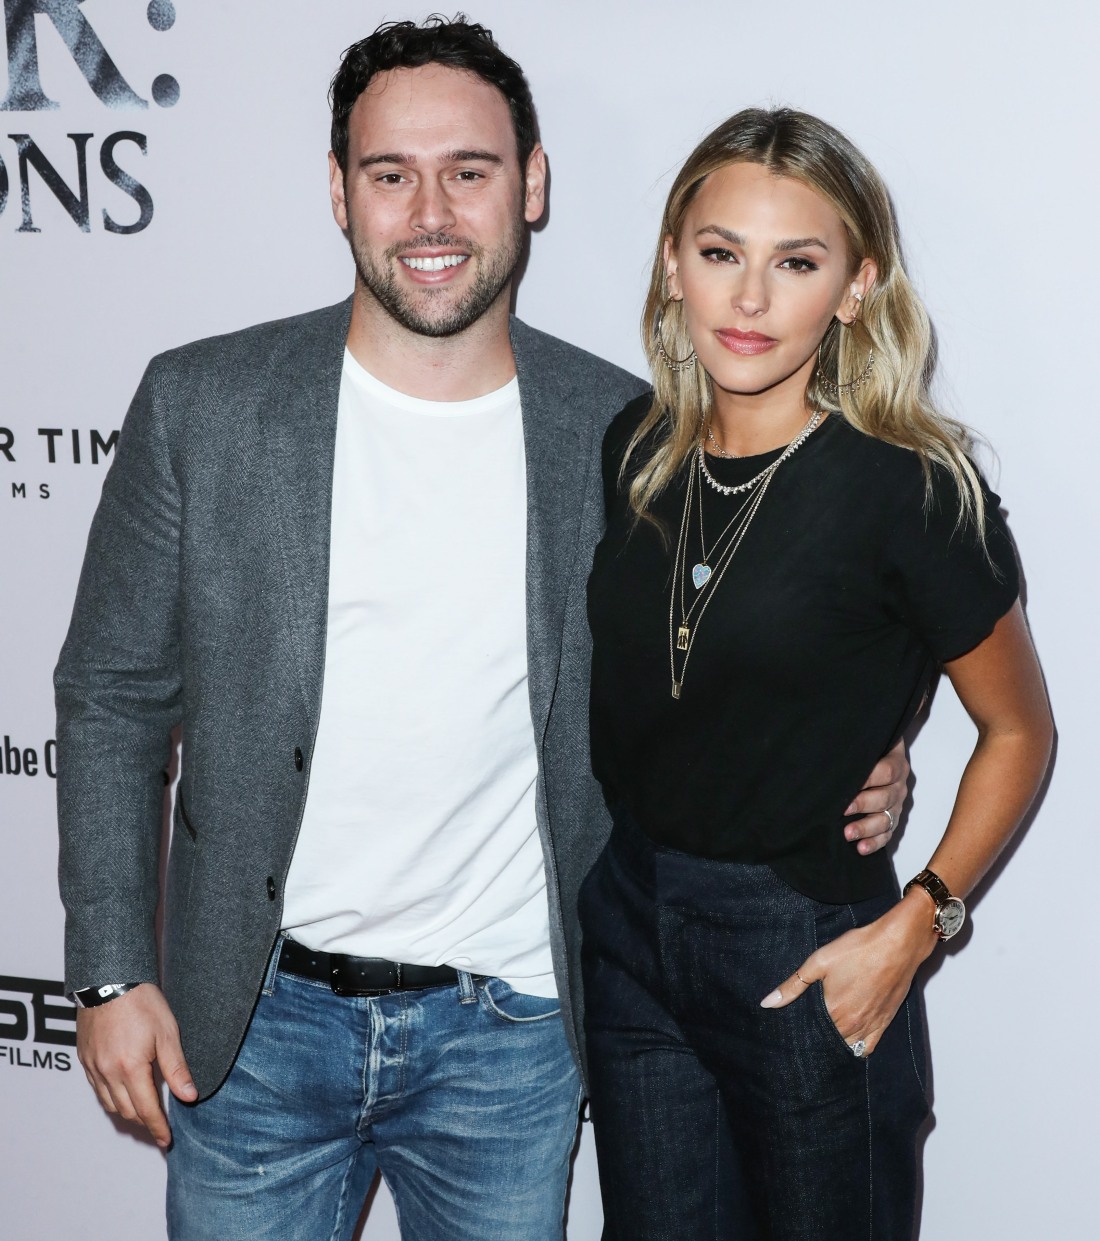 Scooter Braun and wife Yael Cohen arrive at the Los Angeles Premiere Of YouTube Originals' 'Justin Bieber: Seasons' held at the Regency Bruin Theatre on January 27, 2020 in Westwood, Los Angeles, California, United States.